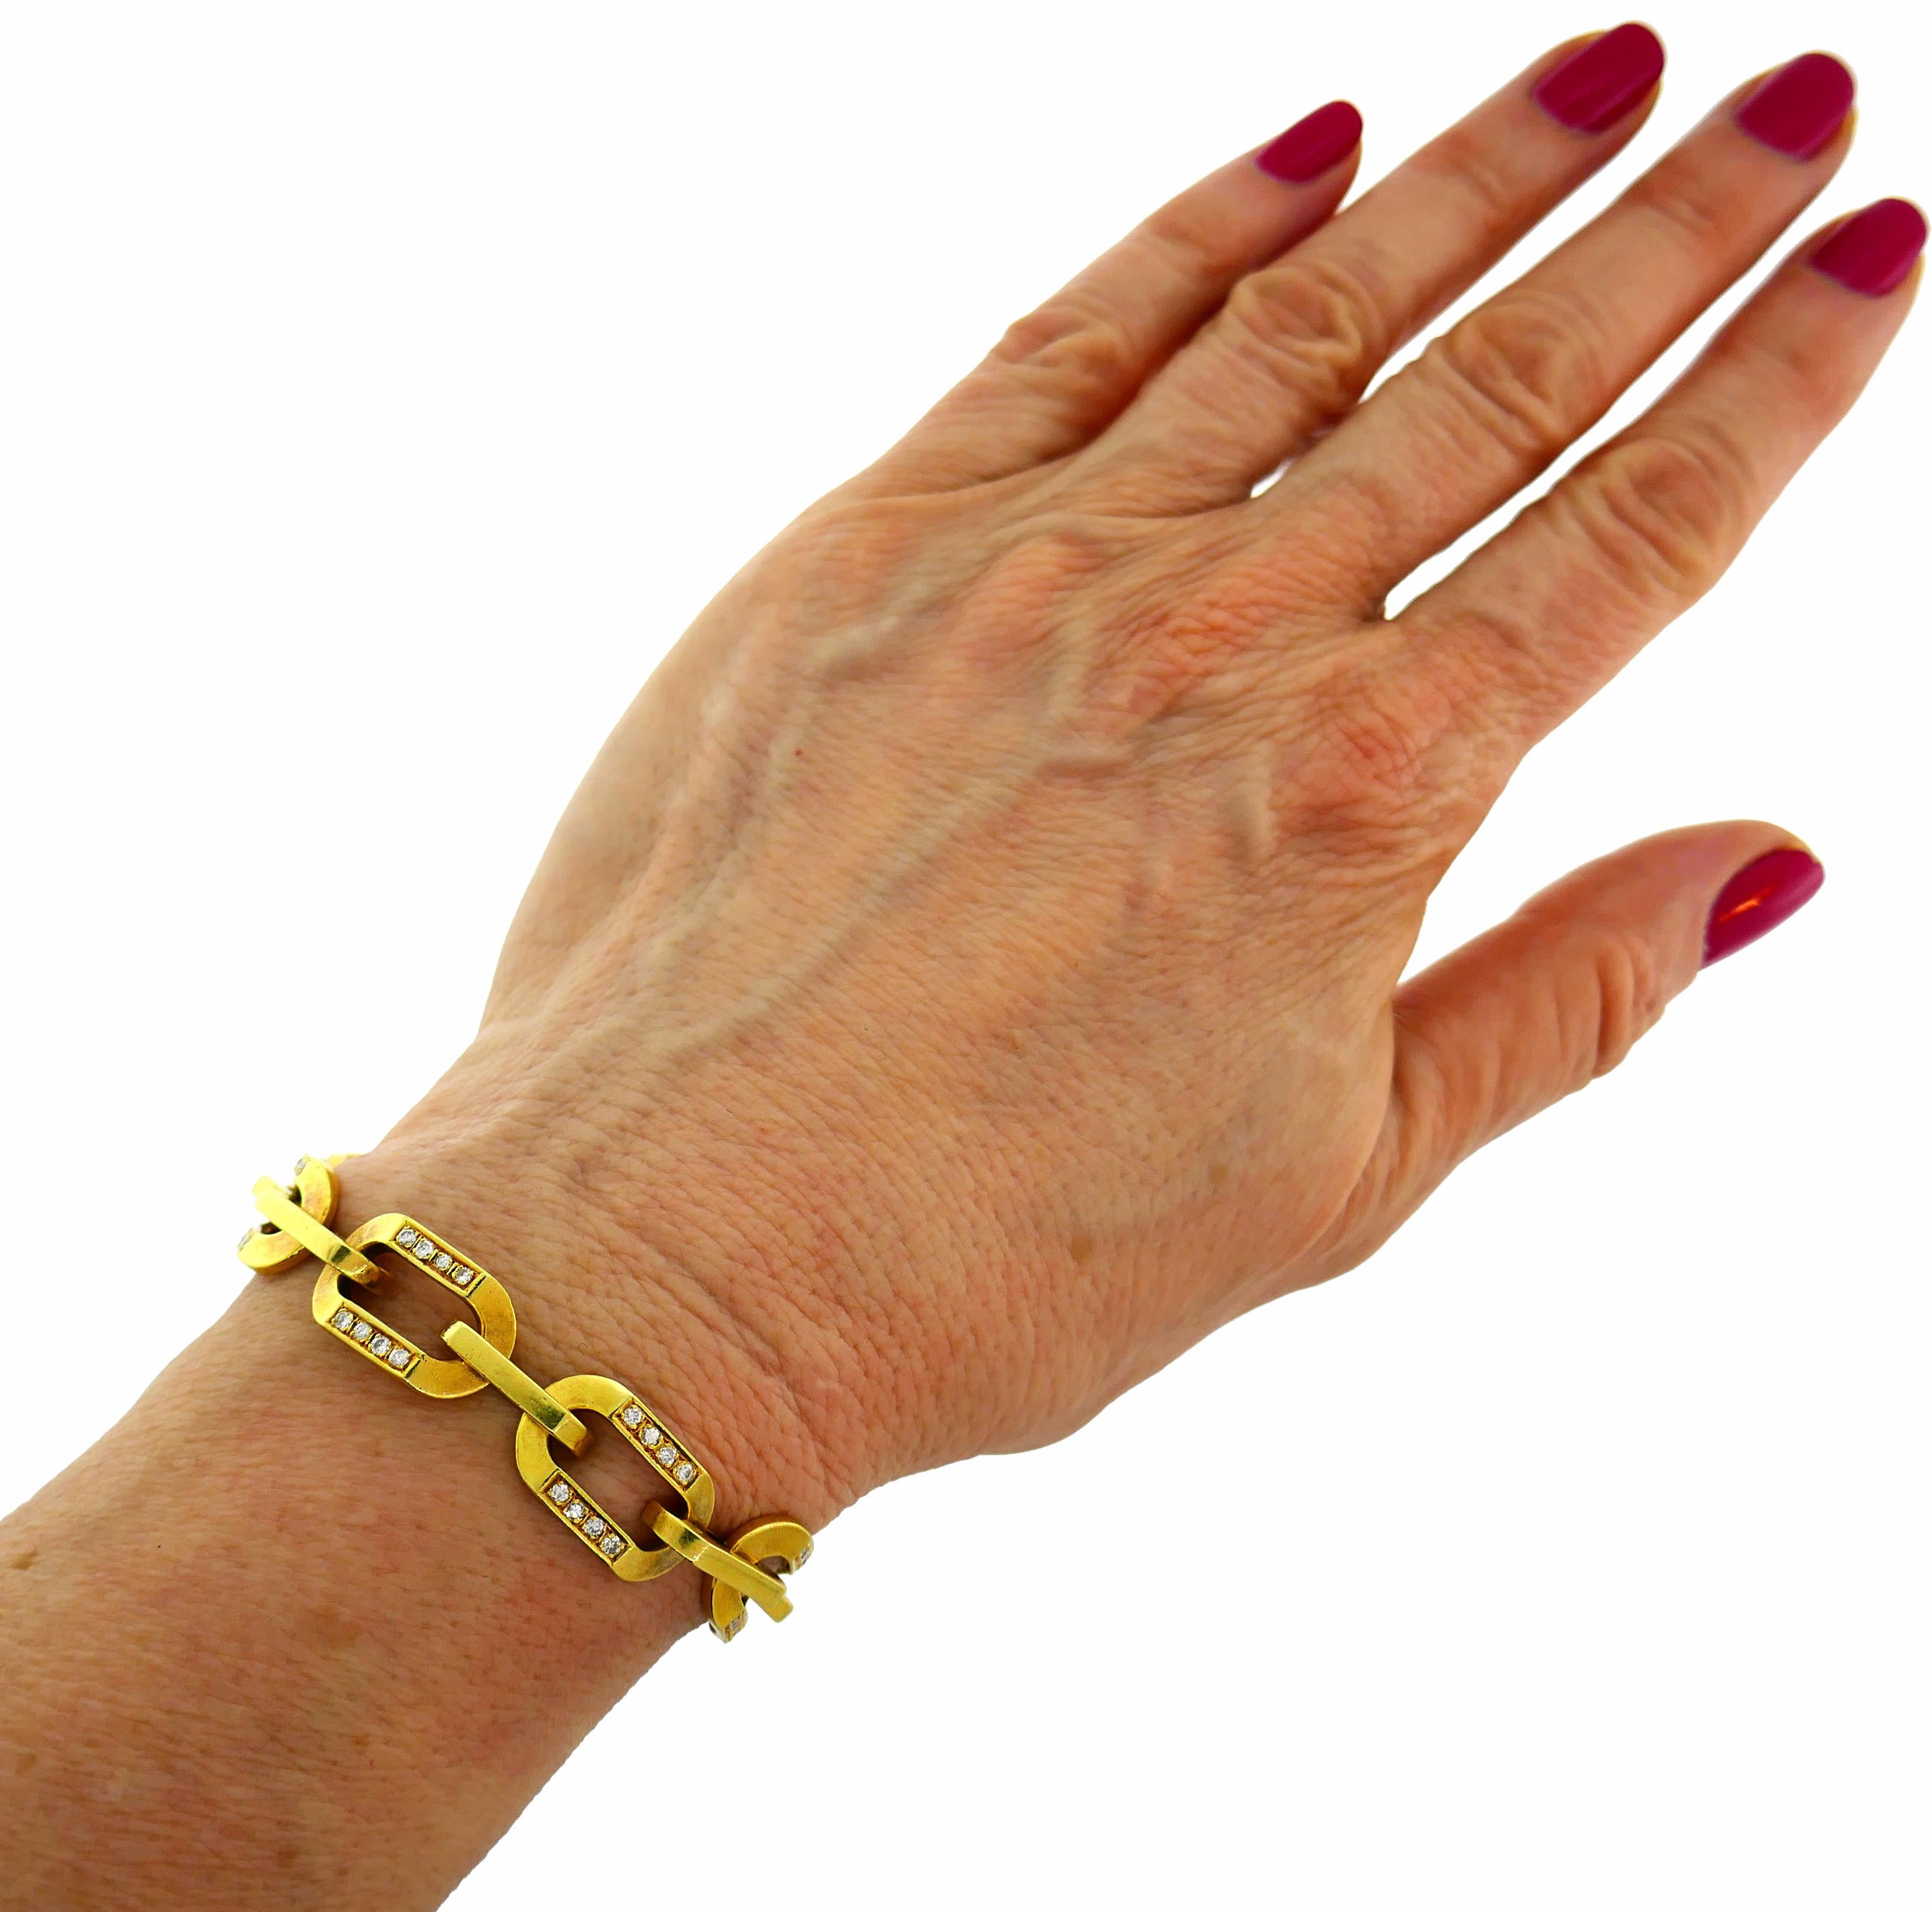 Bold yet elegant bracelet created by Bulgari in Italy in the 1980s. Chic and wearable, the bracelet is a great addition to your jewelry collection. 
The bracelet is made of 18 karat yellow gold and set with round brilliant cut diamonds (F-G color,